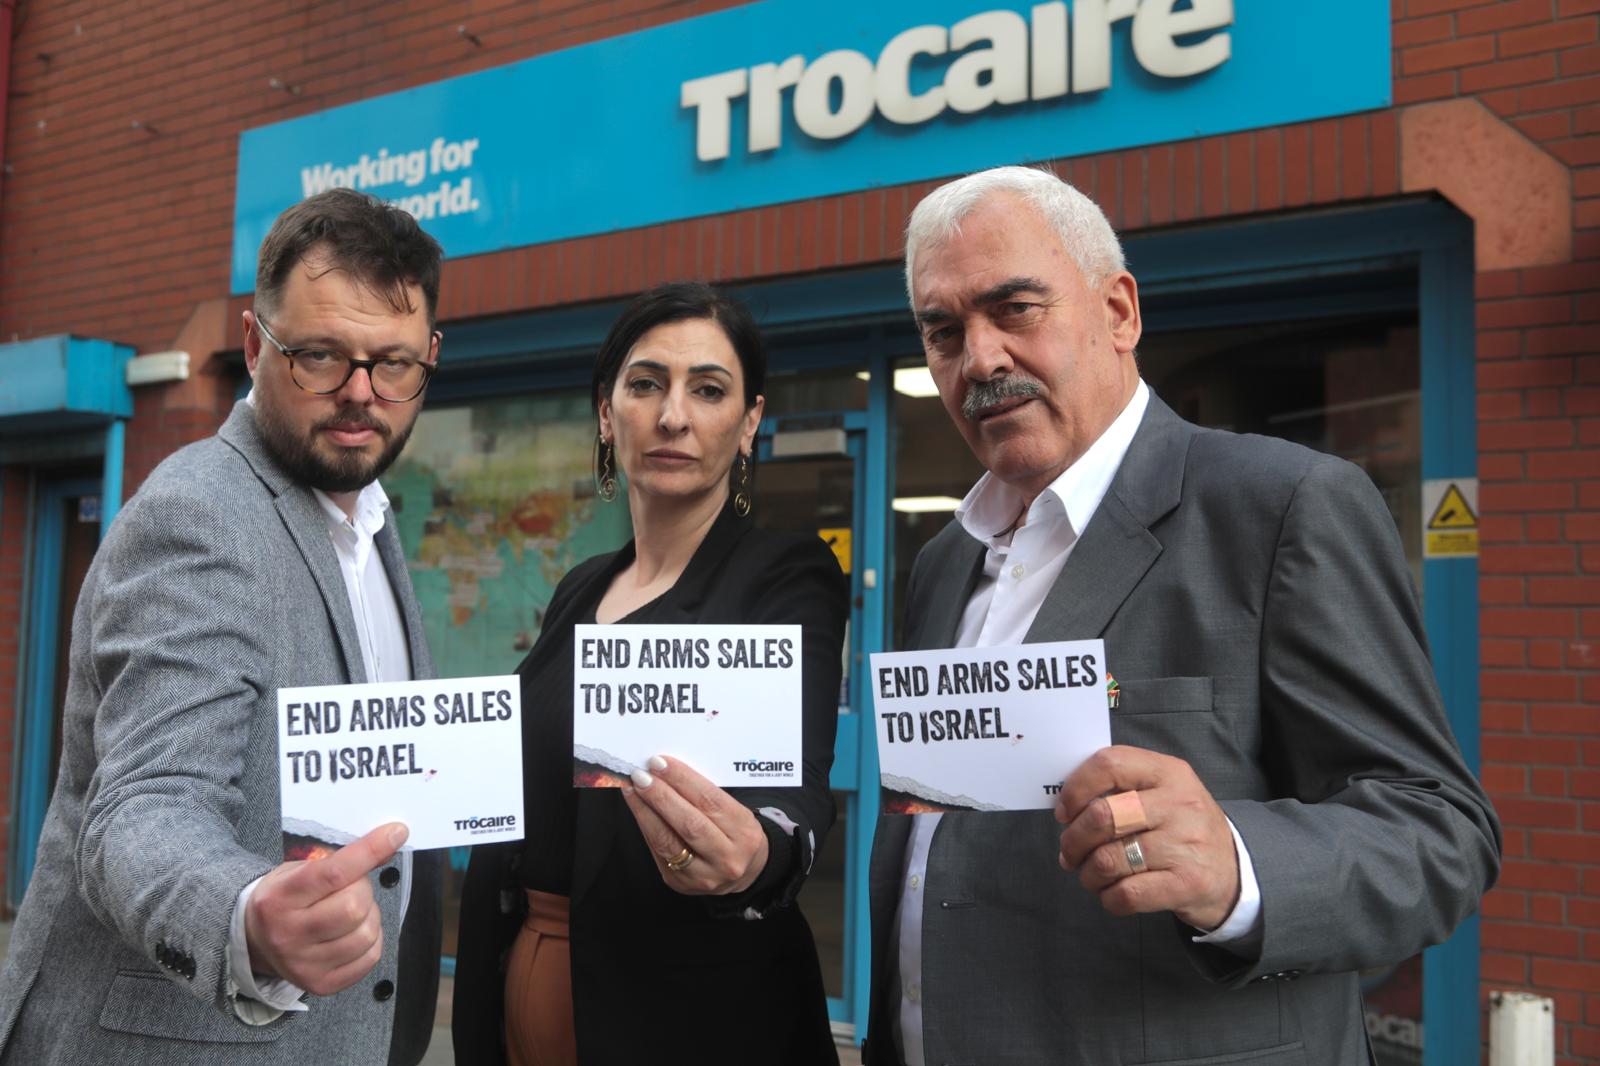 CLEAR MESSAGE: Peter Heaney, Trócaire’s Head of Region NI, Lubnah Shomali and Shawan Jabarin